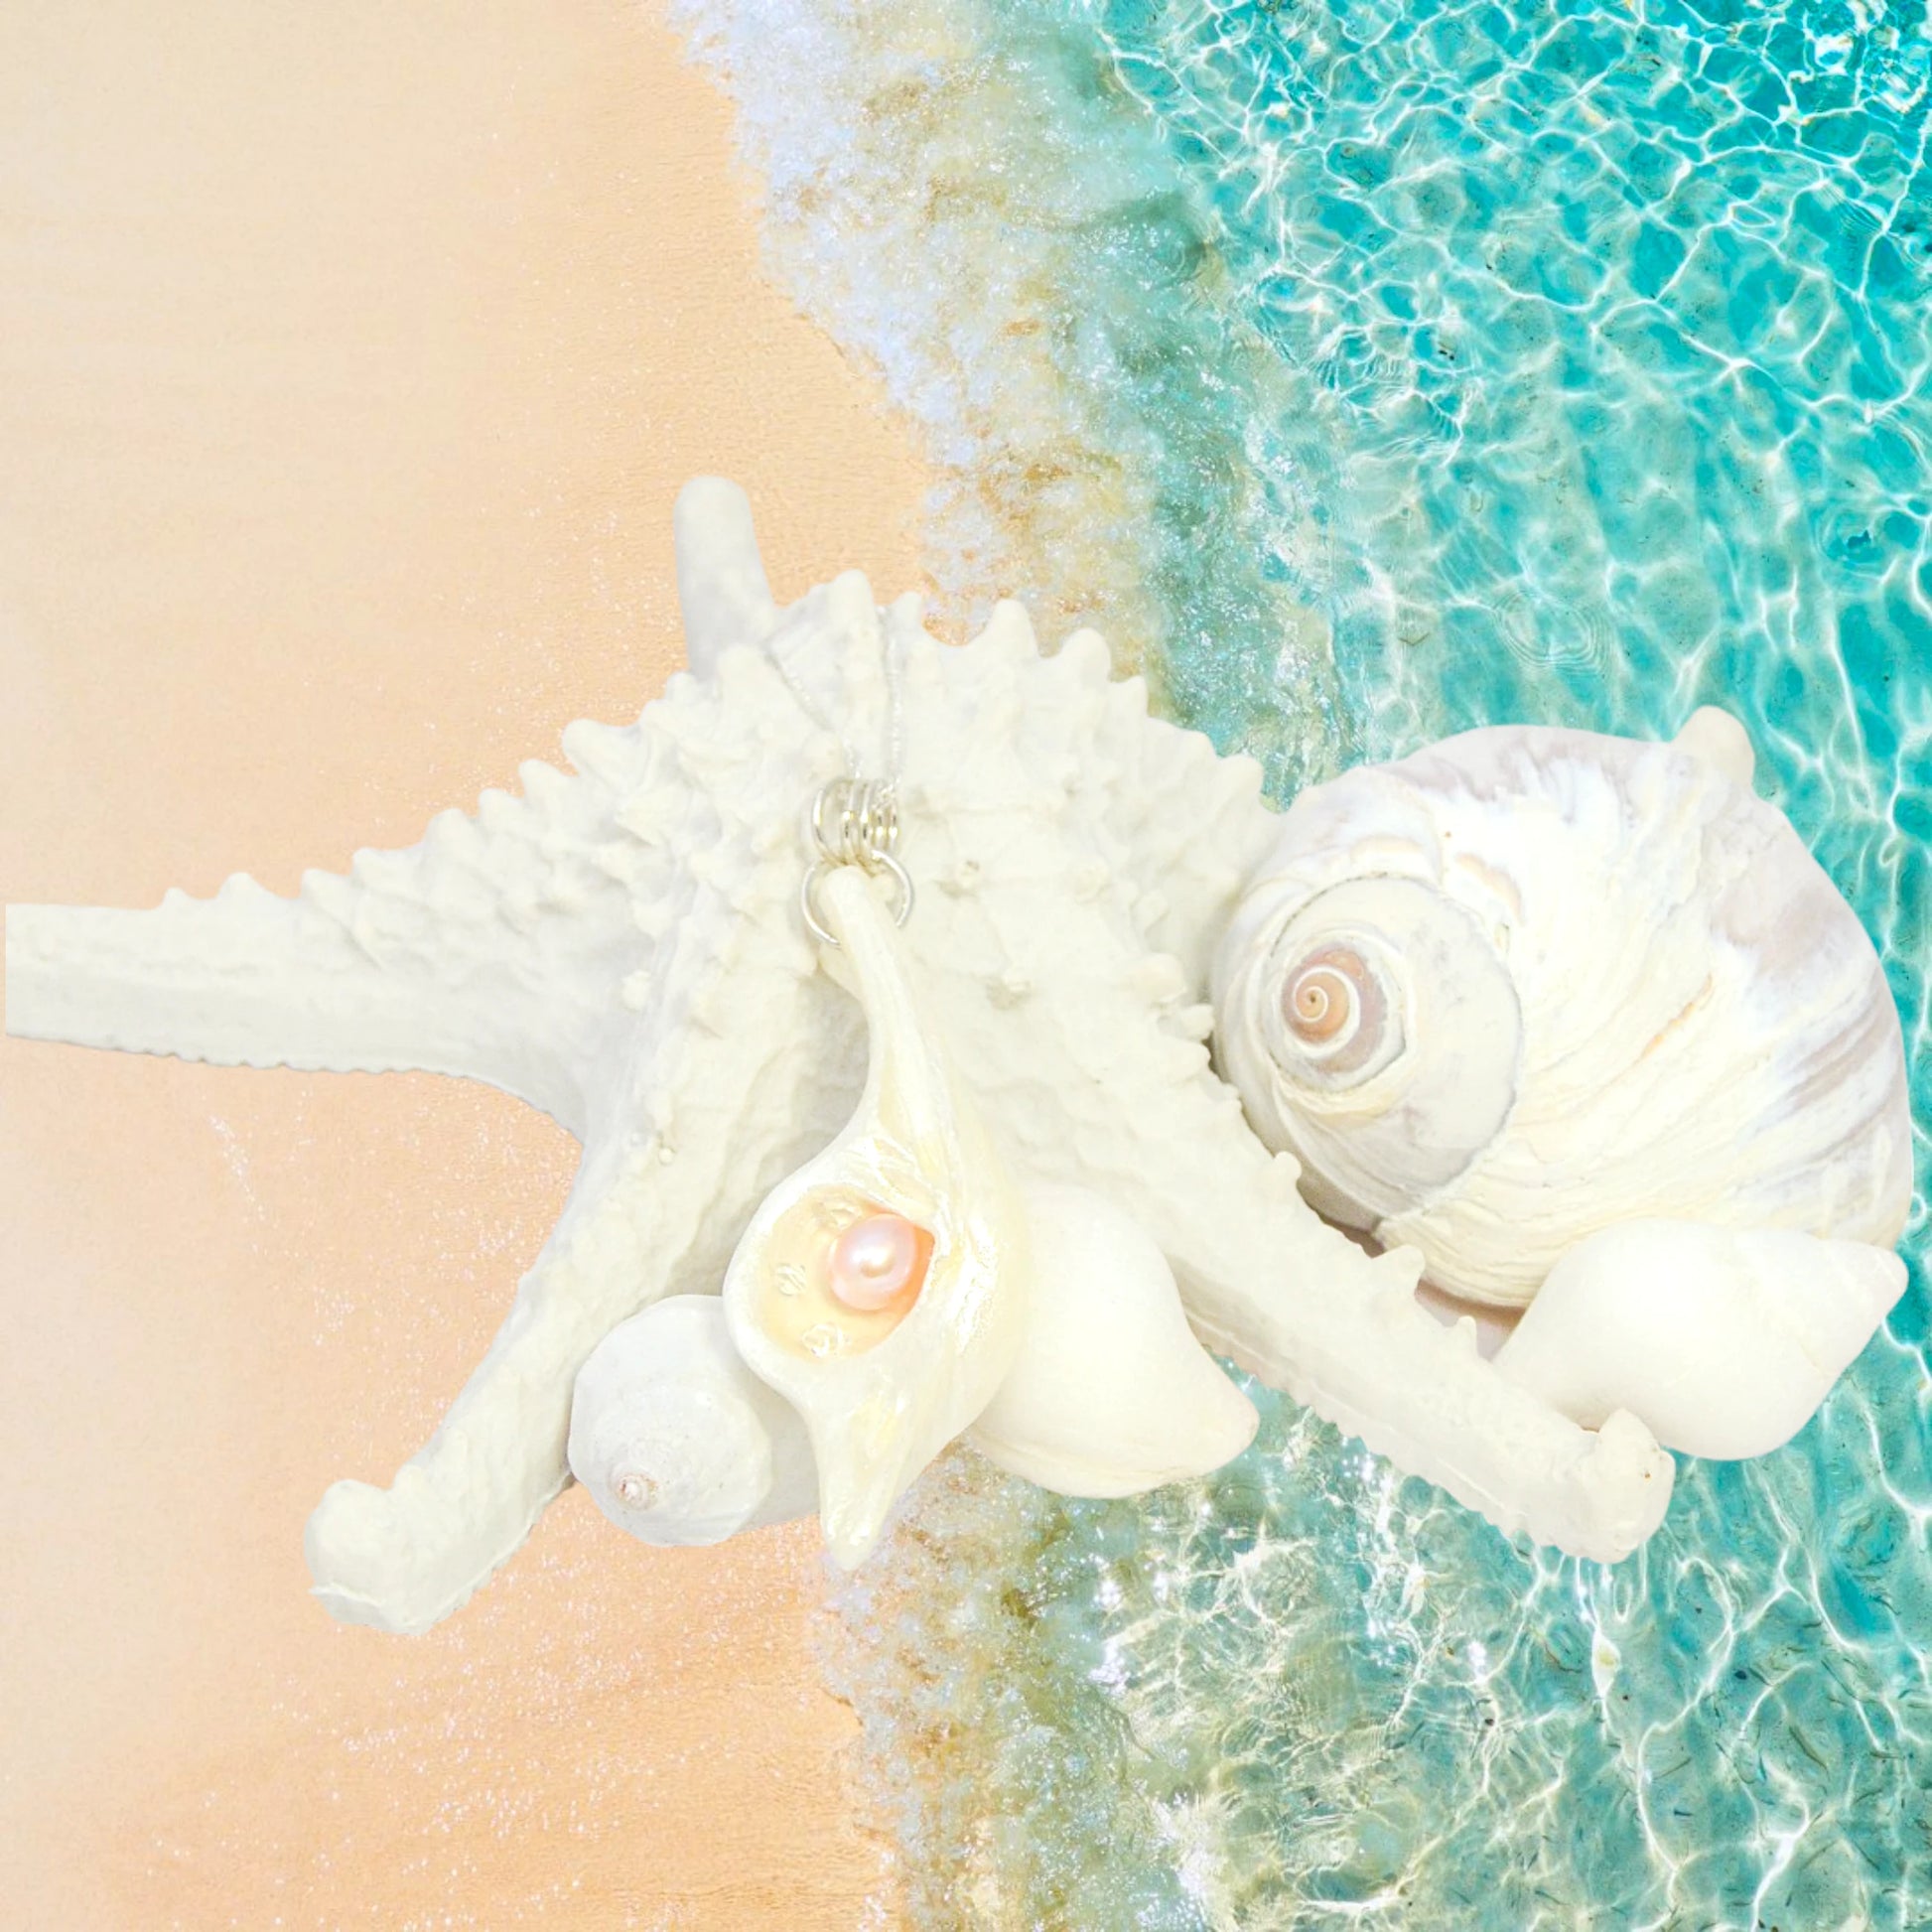 The natural seashell pendant Champagne on ice is shown resting on several smaller seashells and a starfish and a moon snail shell.  The background is the sand and ocean.  Summer vibes.